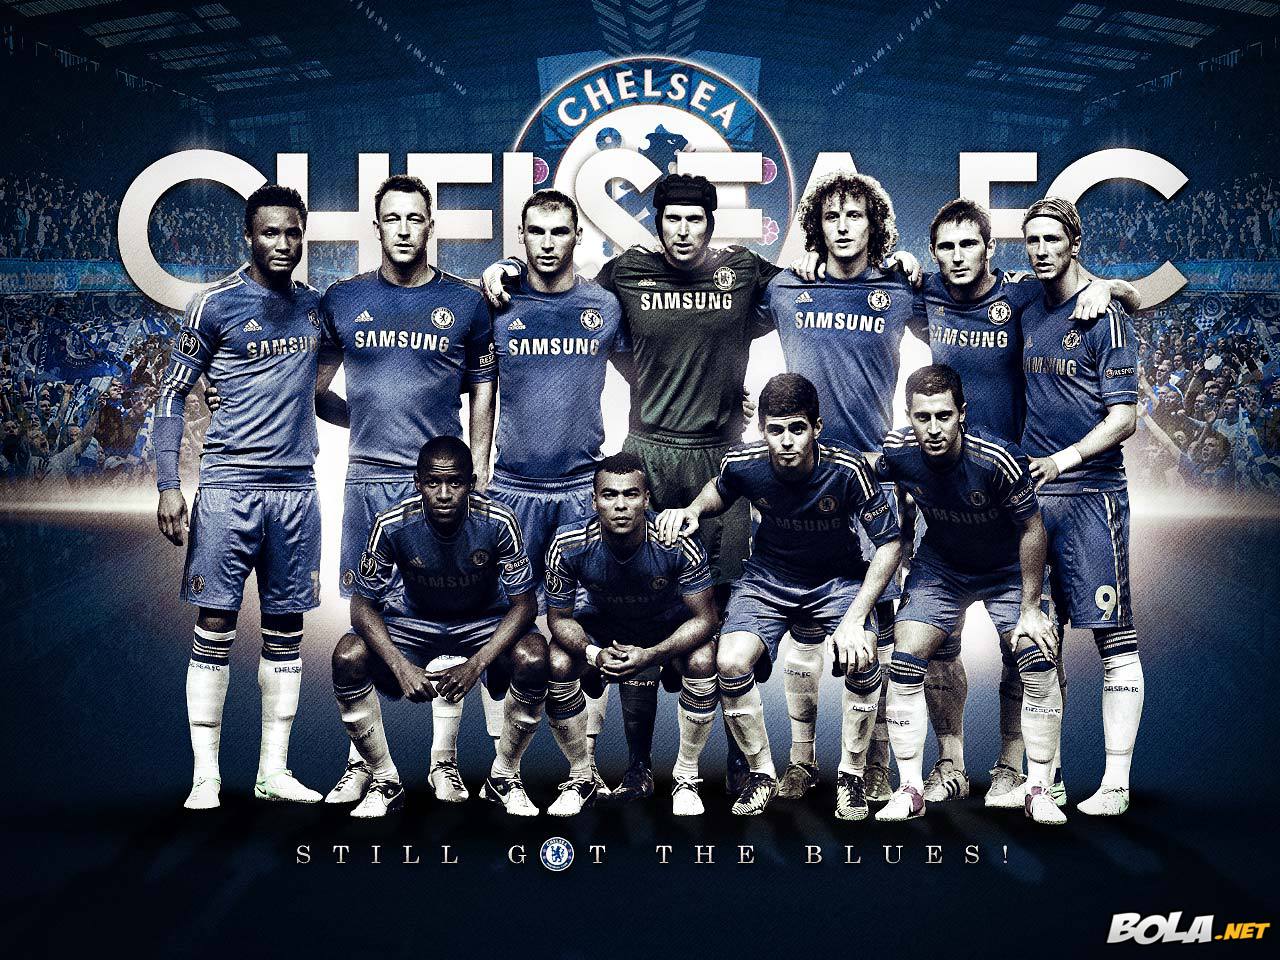 Download Wallpaper Chelsea Bolanet